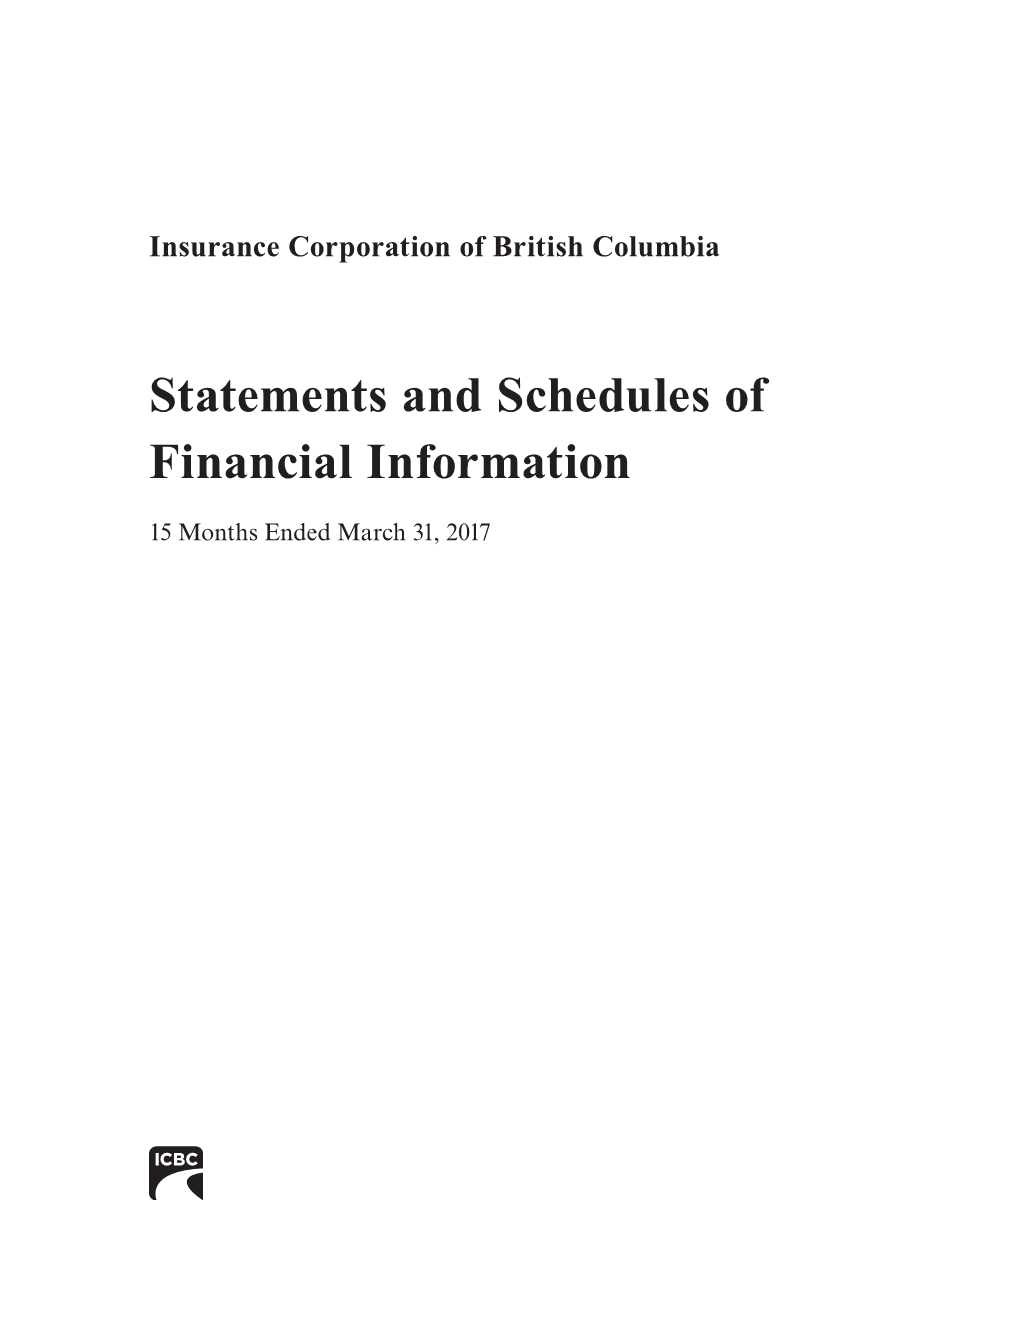 Statements and Schedules of Financial Information